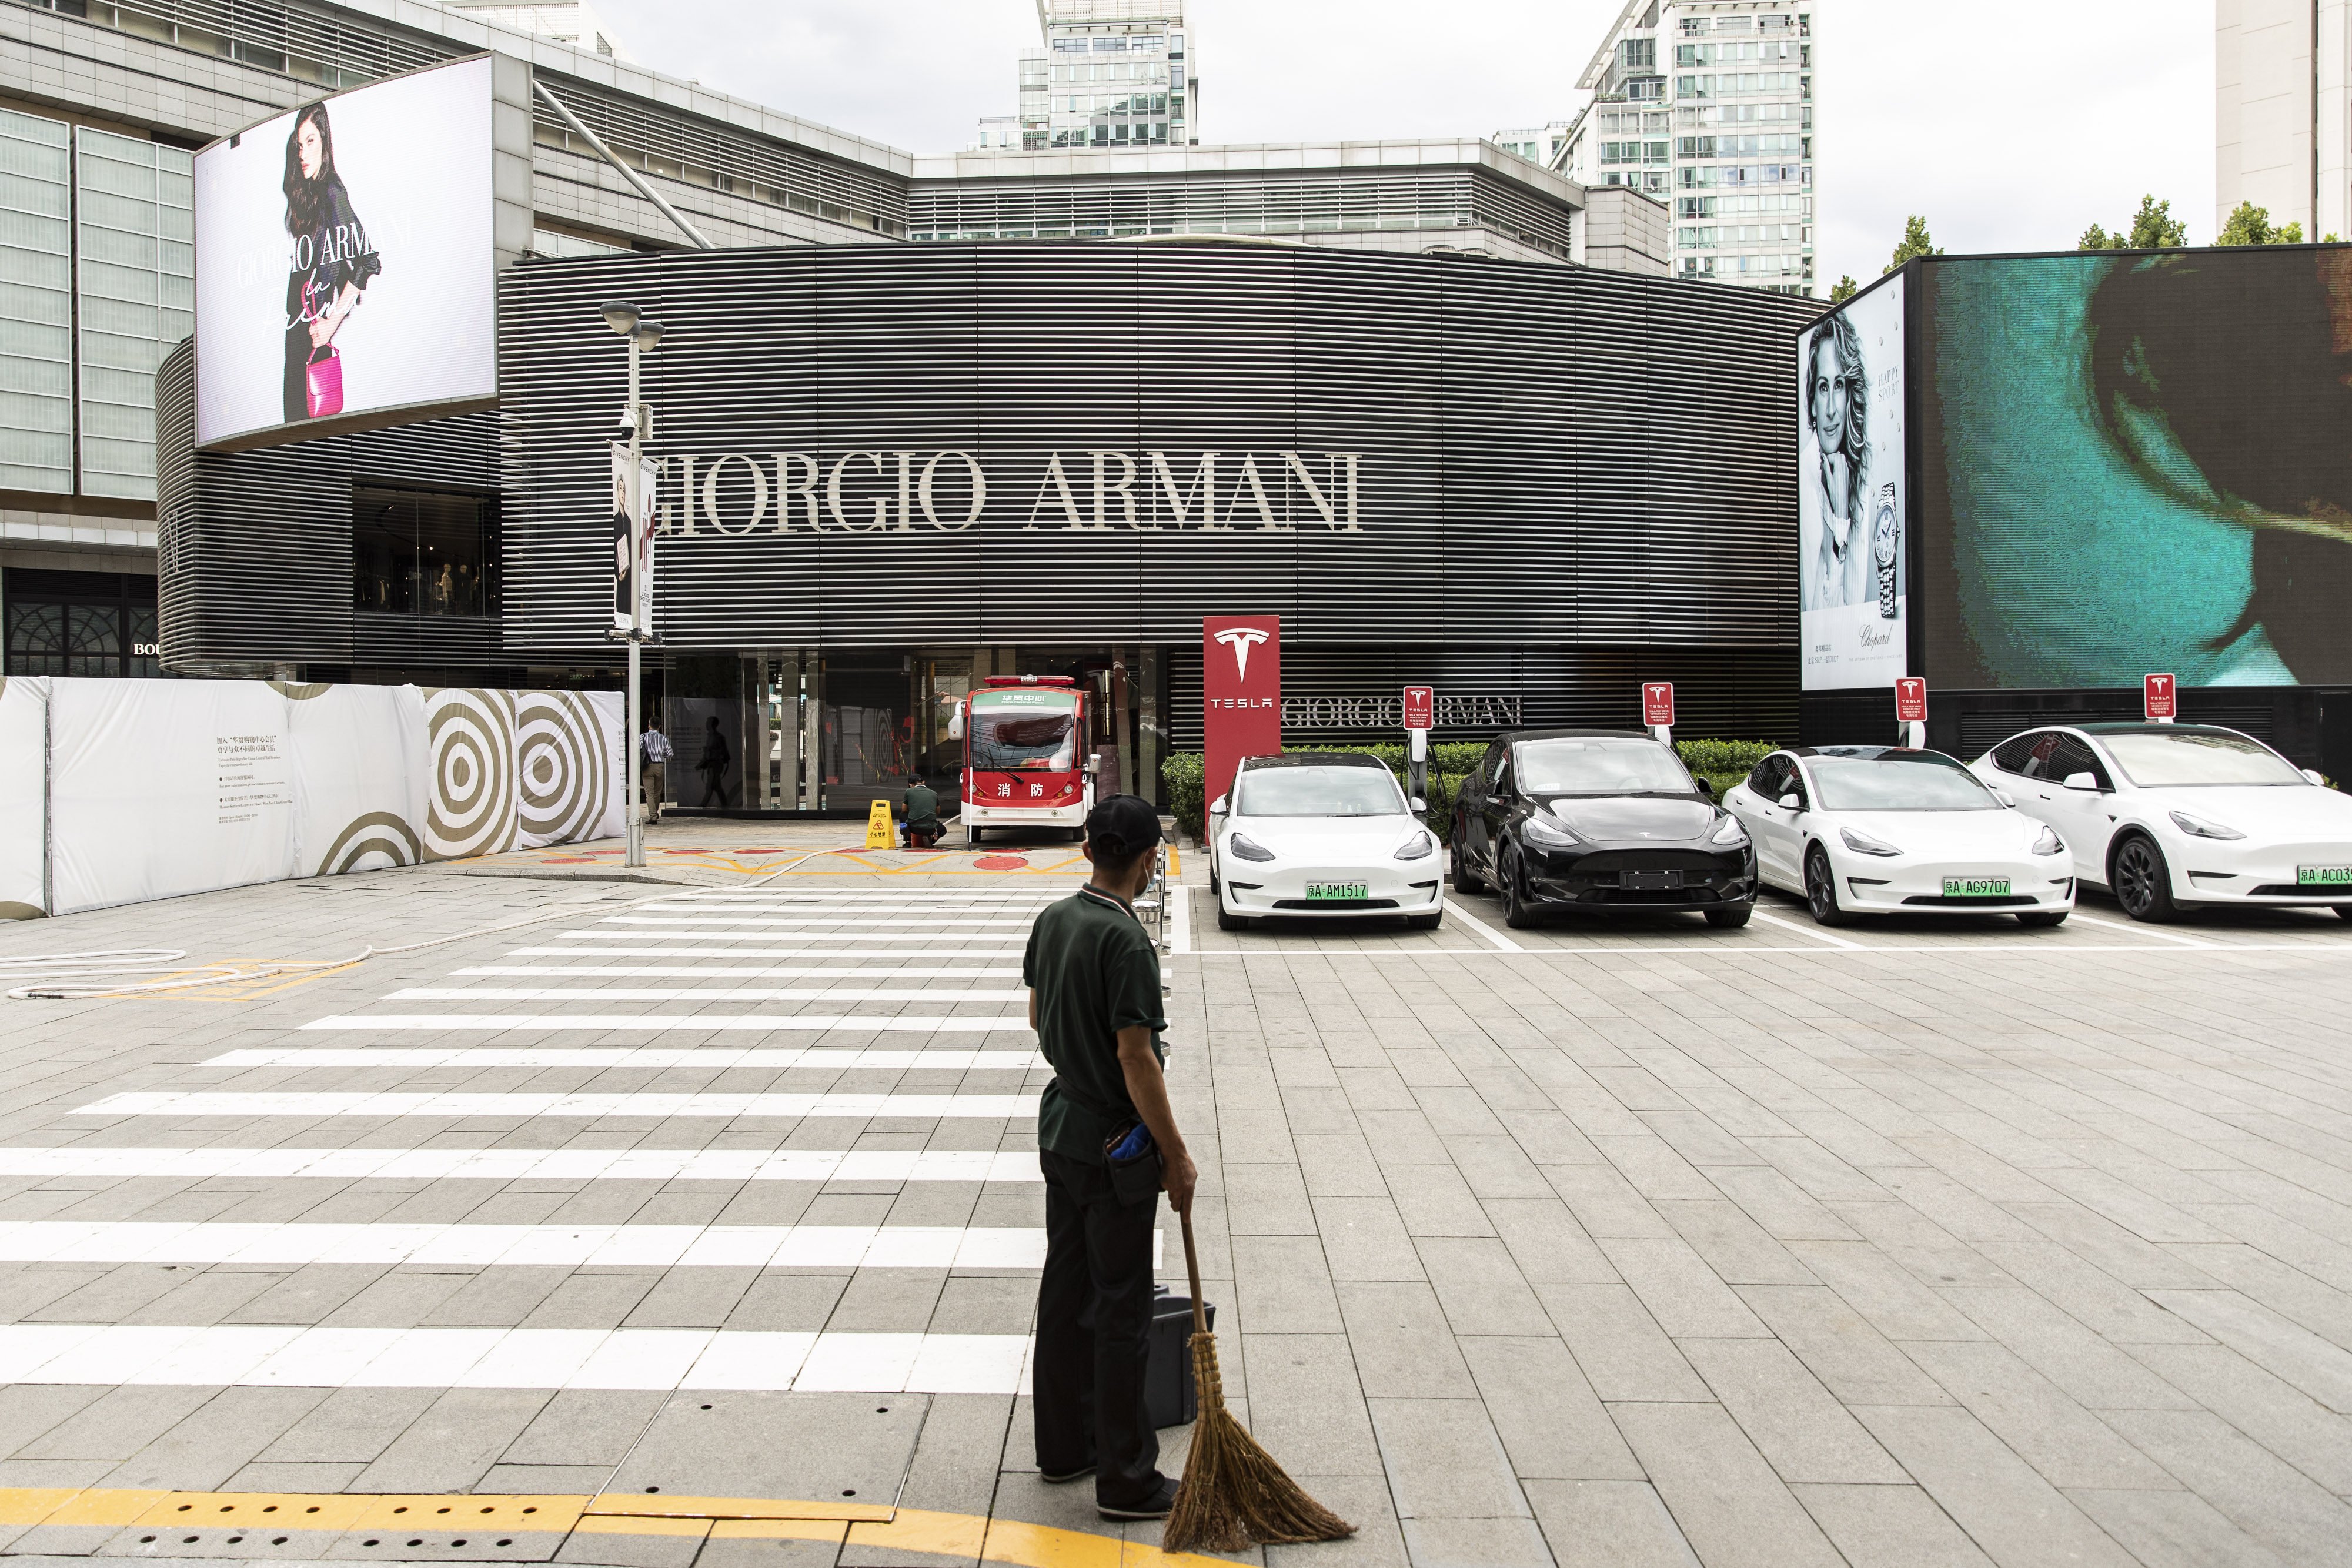 A cleaner stands outside an upscale retail area in Beijing, on August 25. As China continues to battle Covid-19 amid faltering growth, the promise of a fairer society could win popular support. Photo: Bloomberg